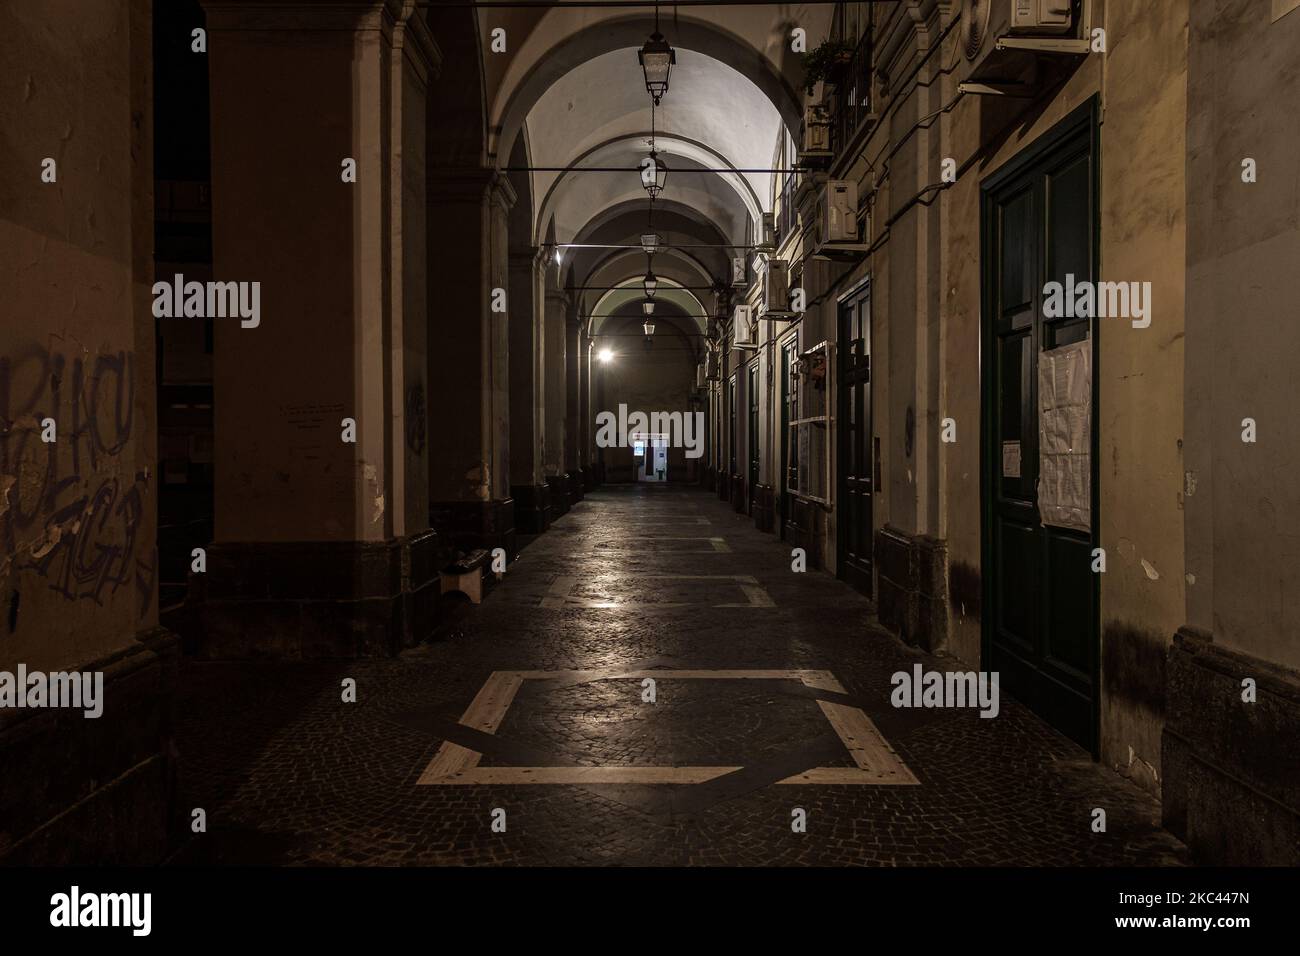 The view of an empty palace porch during the first day of the Red Zone in Aversa, Italy, November 15, 2020. As of today the Campania region is Zona Rossa Covid-19, Campania measures about 4000 contagions per day of Covid-19 and hospitals are collapsing. Today a call for tenders has been made for 450 doctors to fight the Coronavirus in Campania, 150 specialists in Resuscitation, 100 infectivologists, 100 in Respiratory Tract diseases and another 100 specialists in emergency surgery, announced today by the Italian Minister of Regional Affairs, Francesco Boccia. (Photo by Manuel Dorati/NurPhoto) Stock Photo